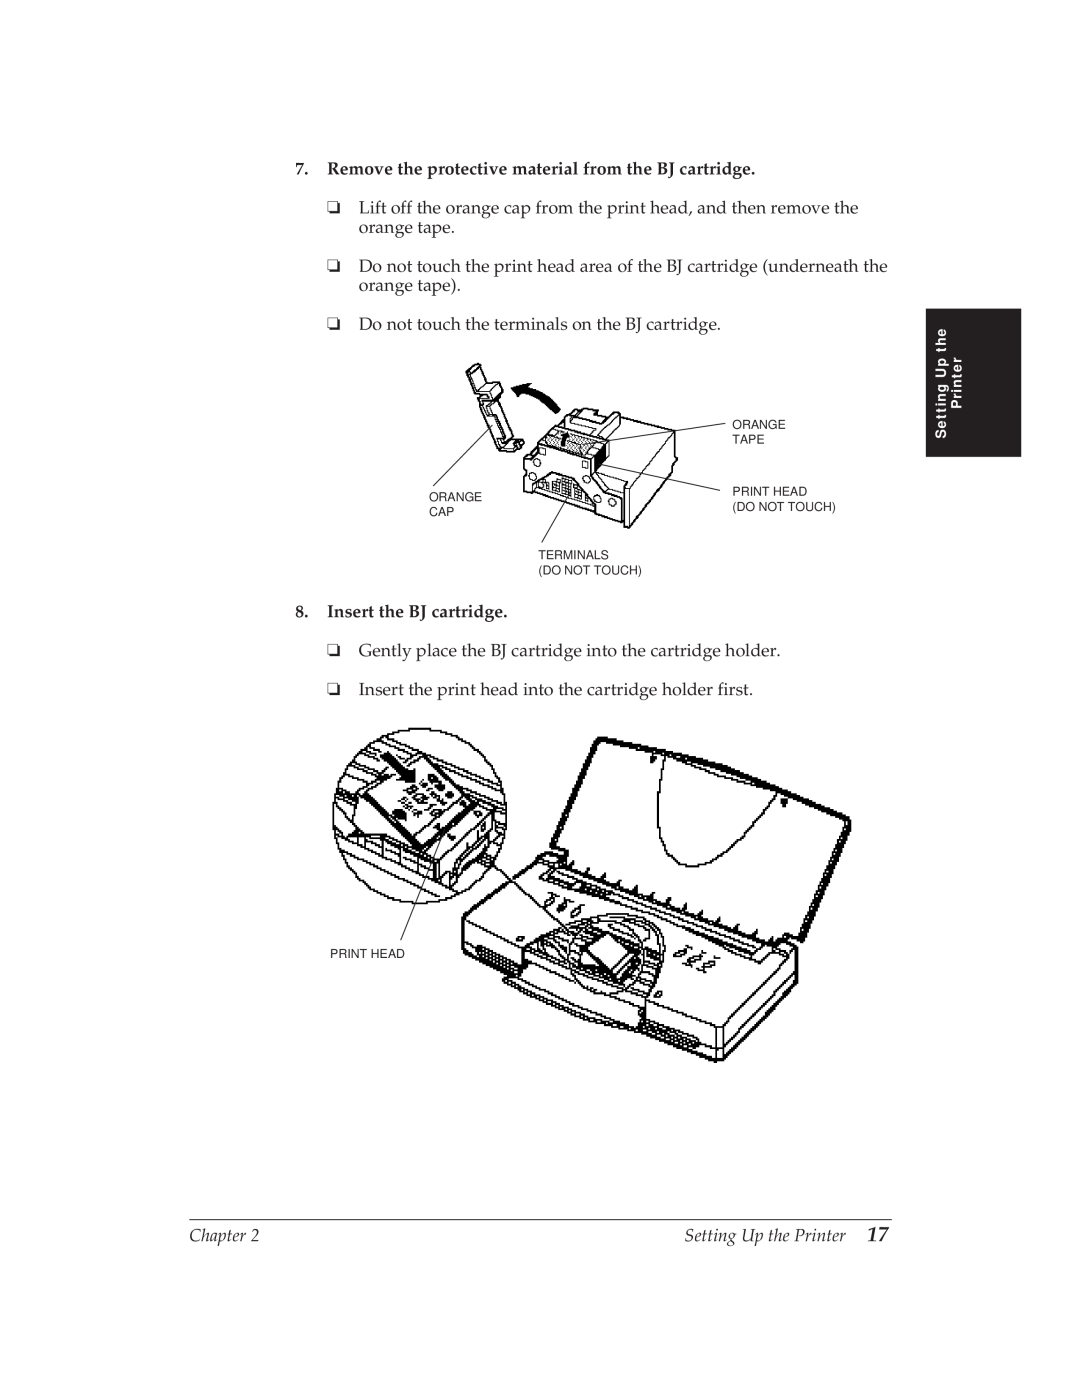 Canon BJ-30 manual Remove the protective material from the BJ cartridge, Insert the BJ cartridge 